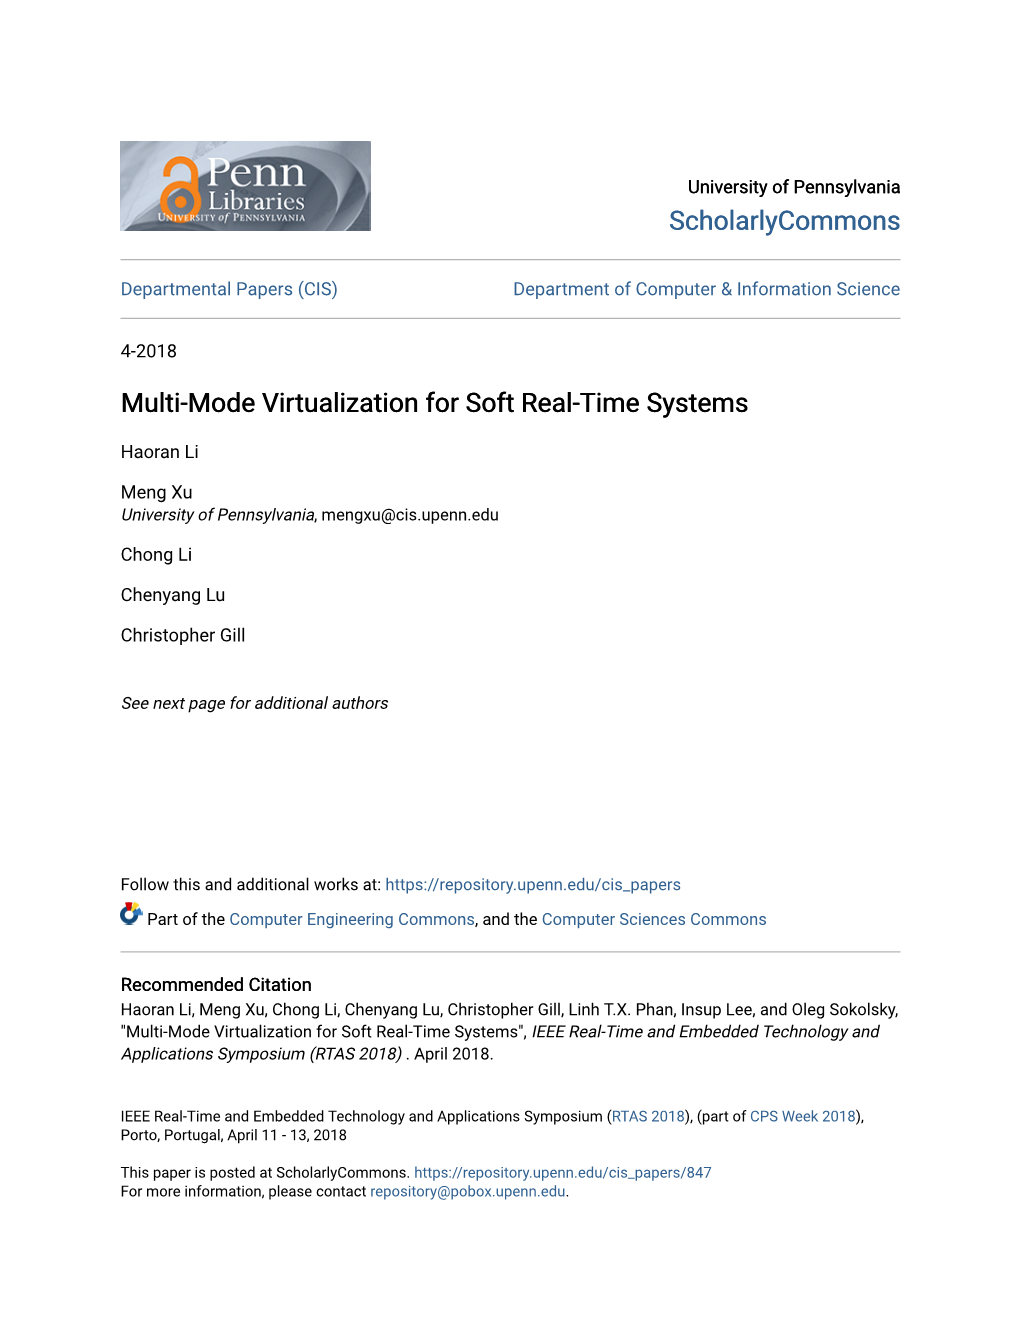 Multi-Mode Virtualization for Soft Real-Time Systems